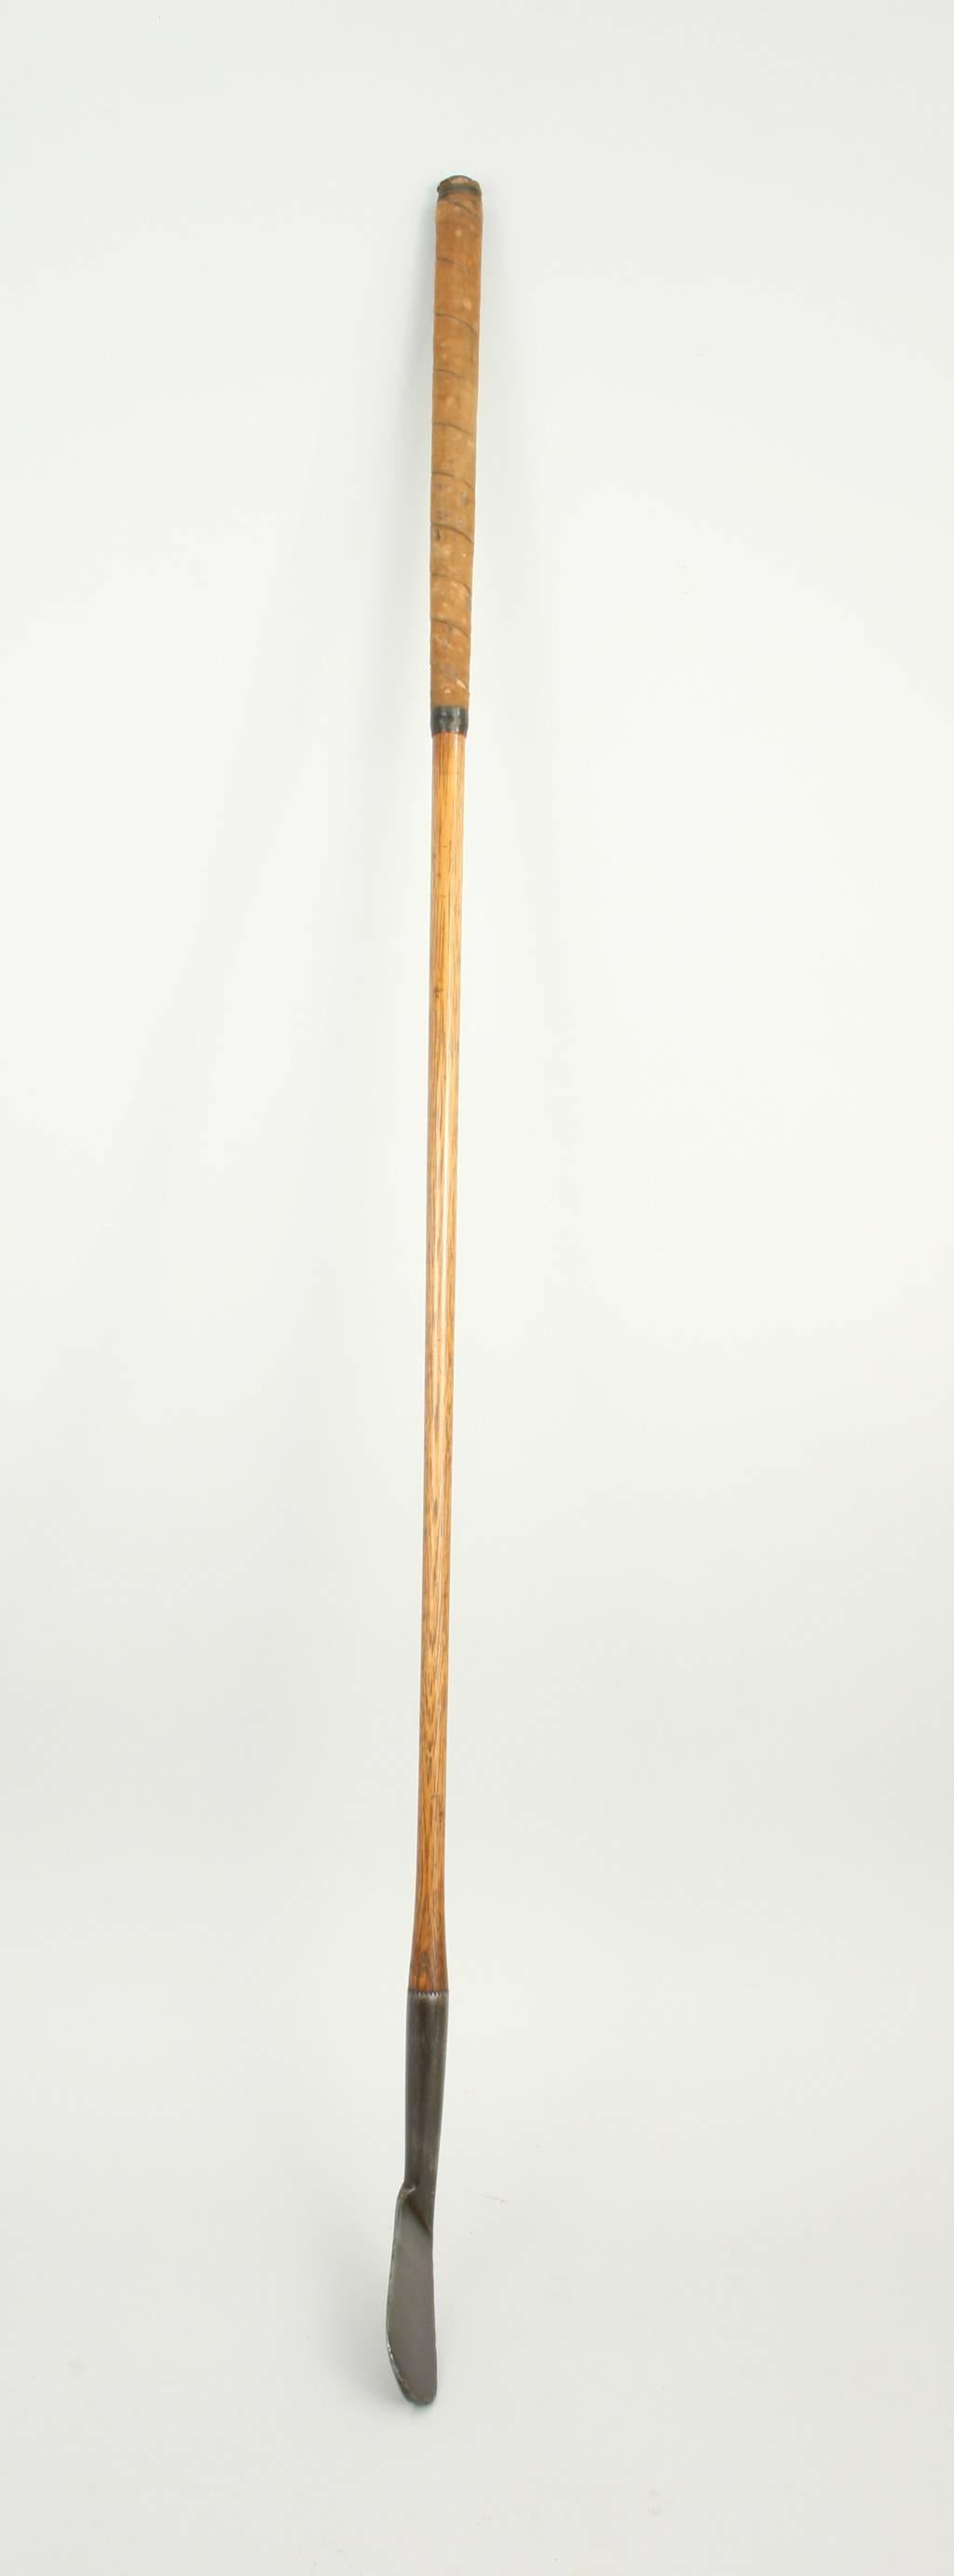 English Antique Hickory Shafted Golf Club, Smooth Face. 19th Century